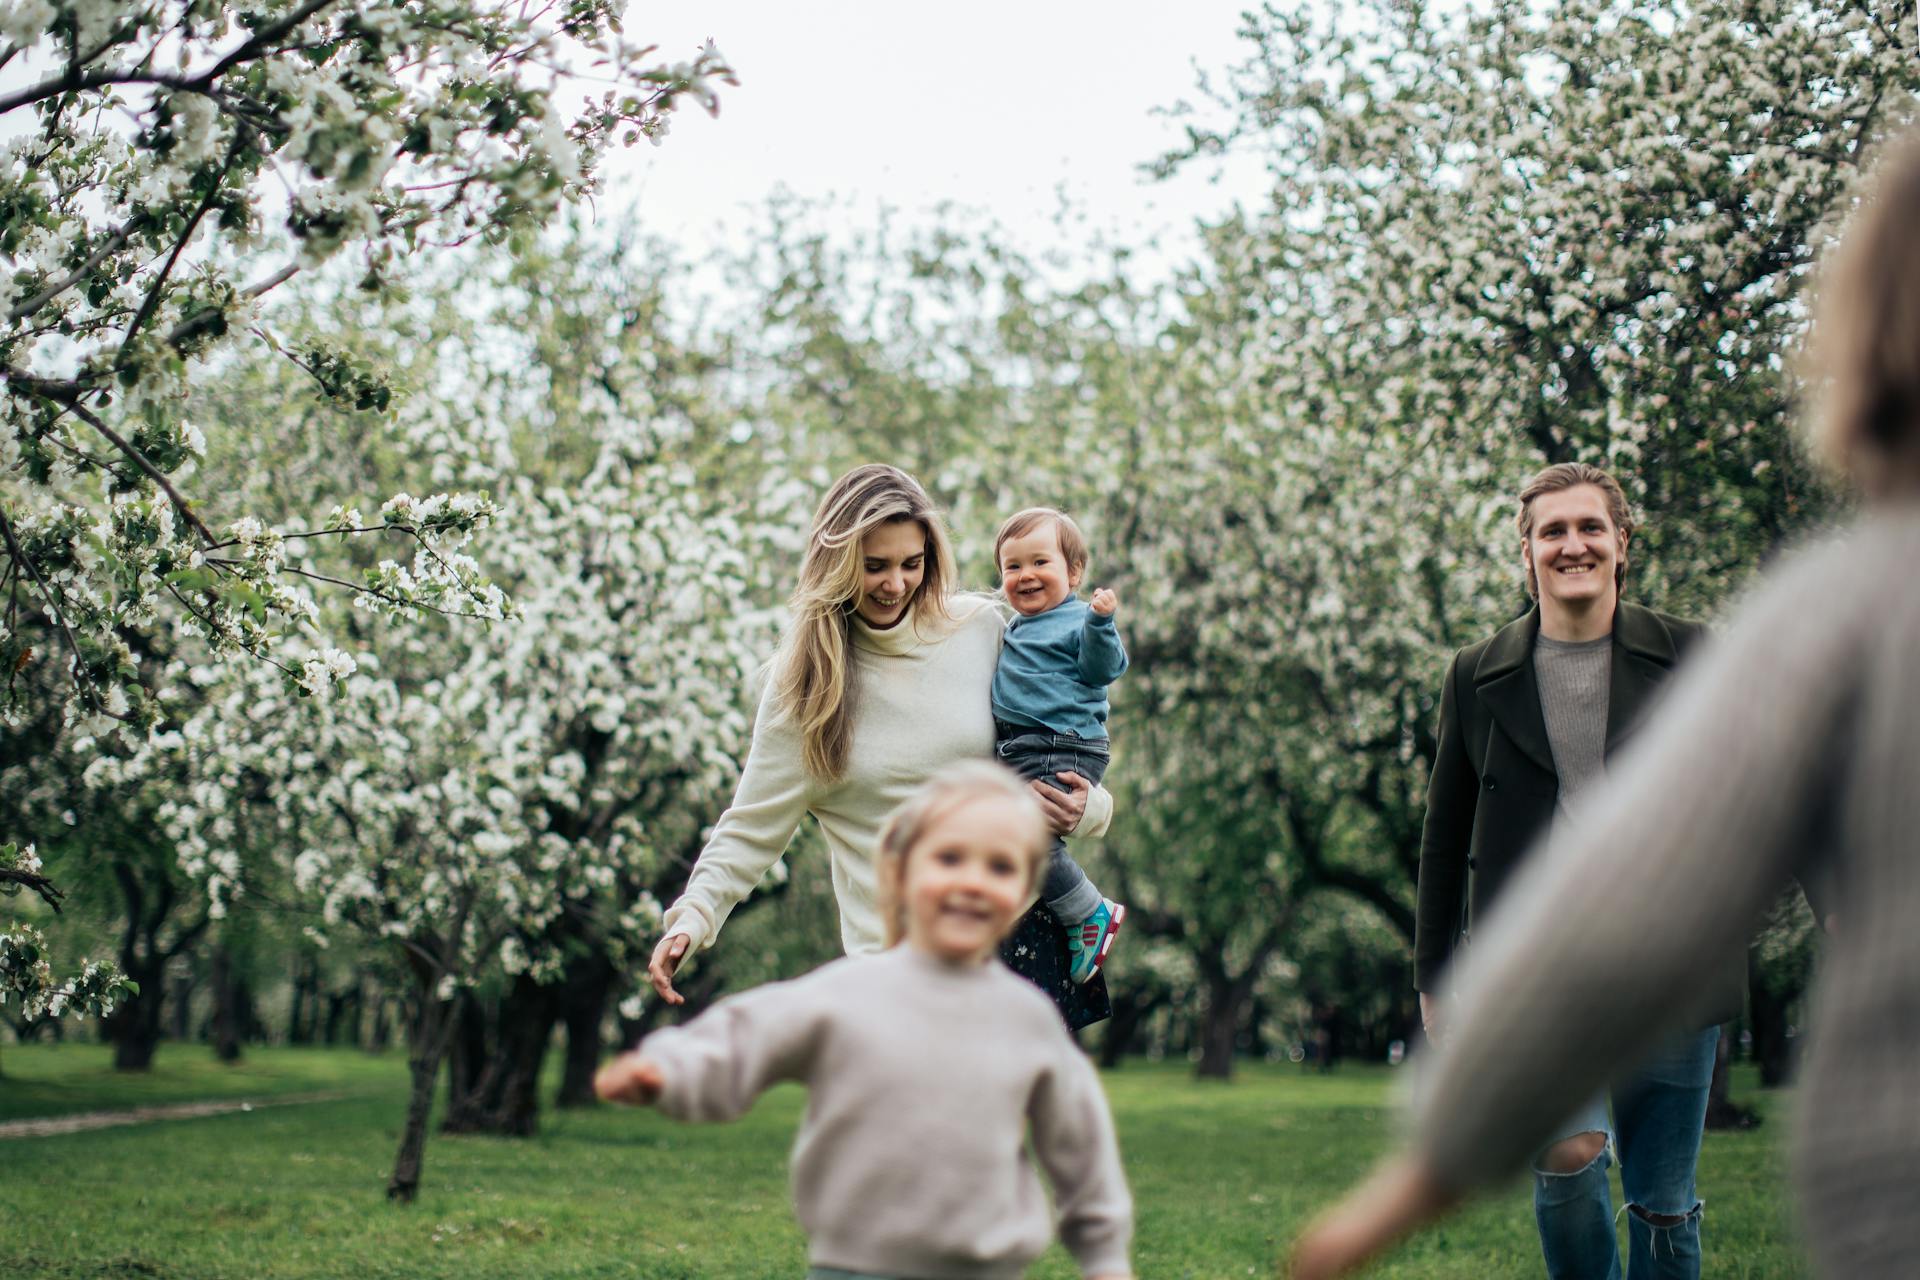 A happy family in a park | Source: Pexels